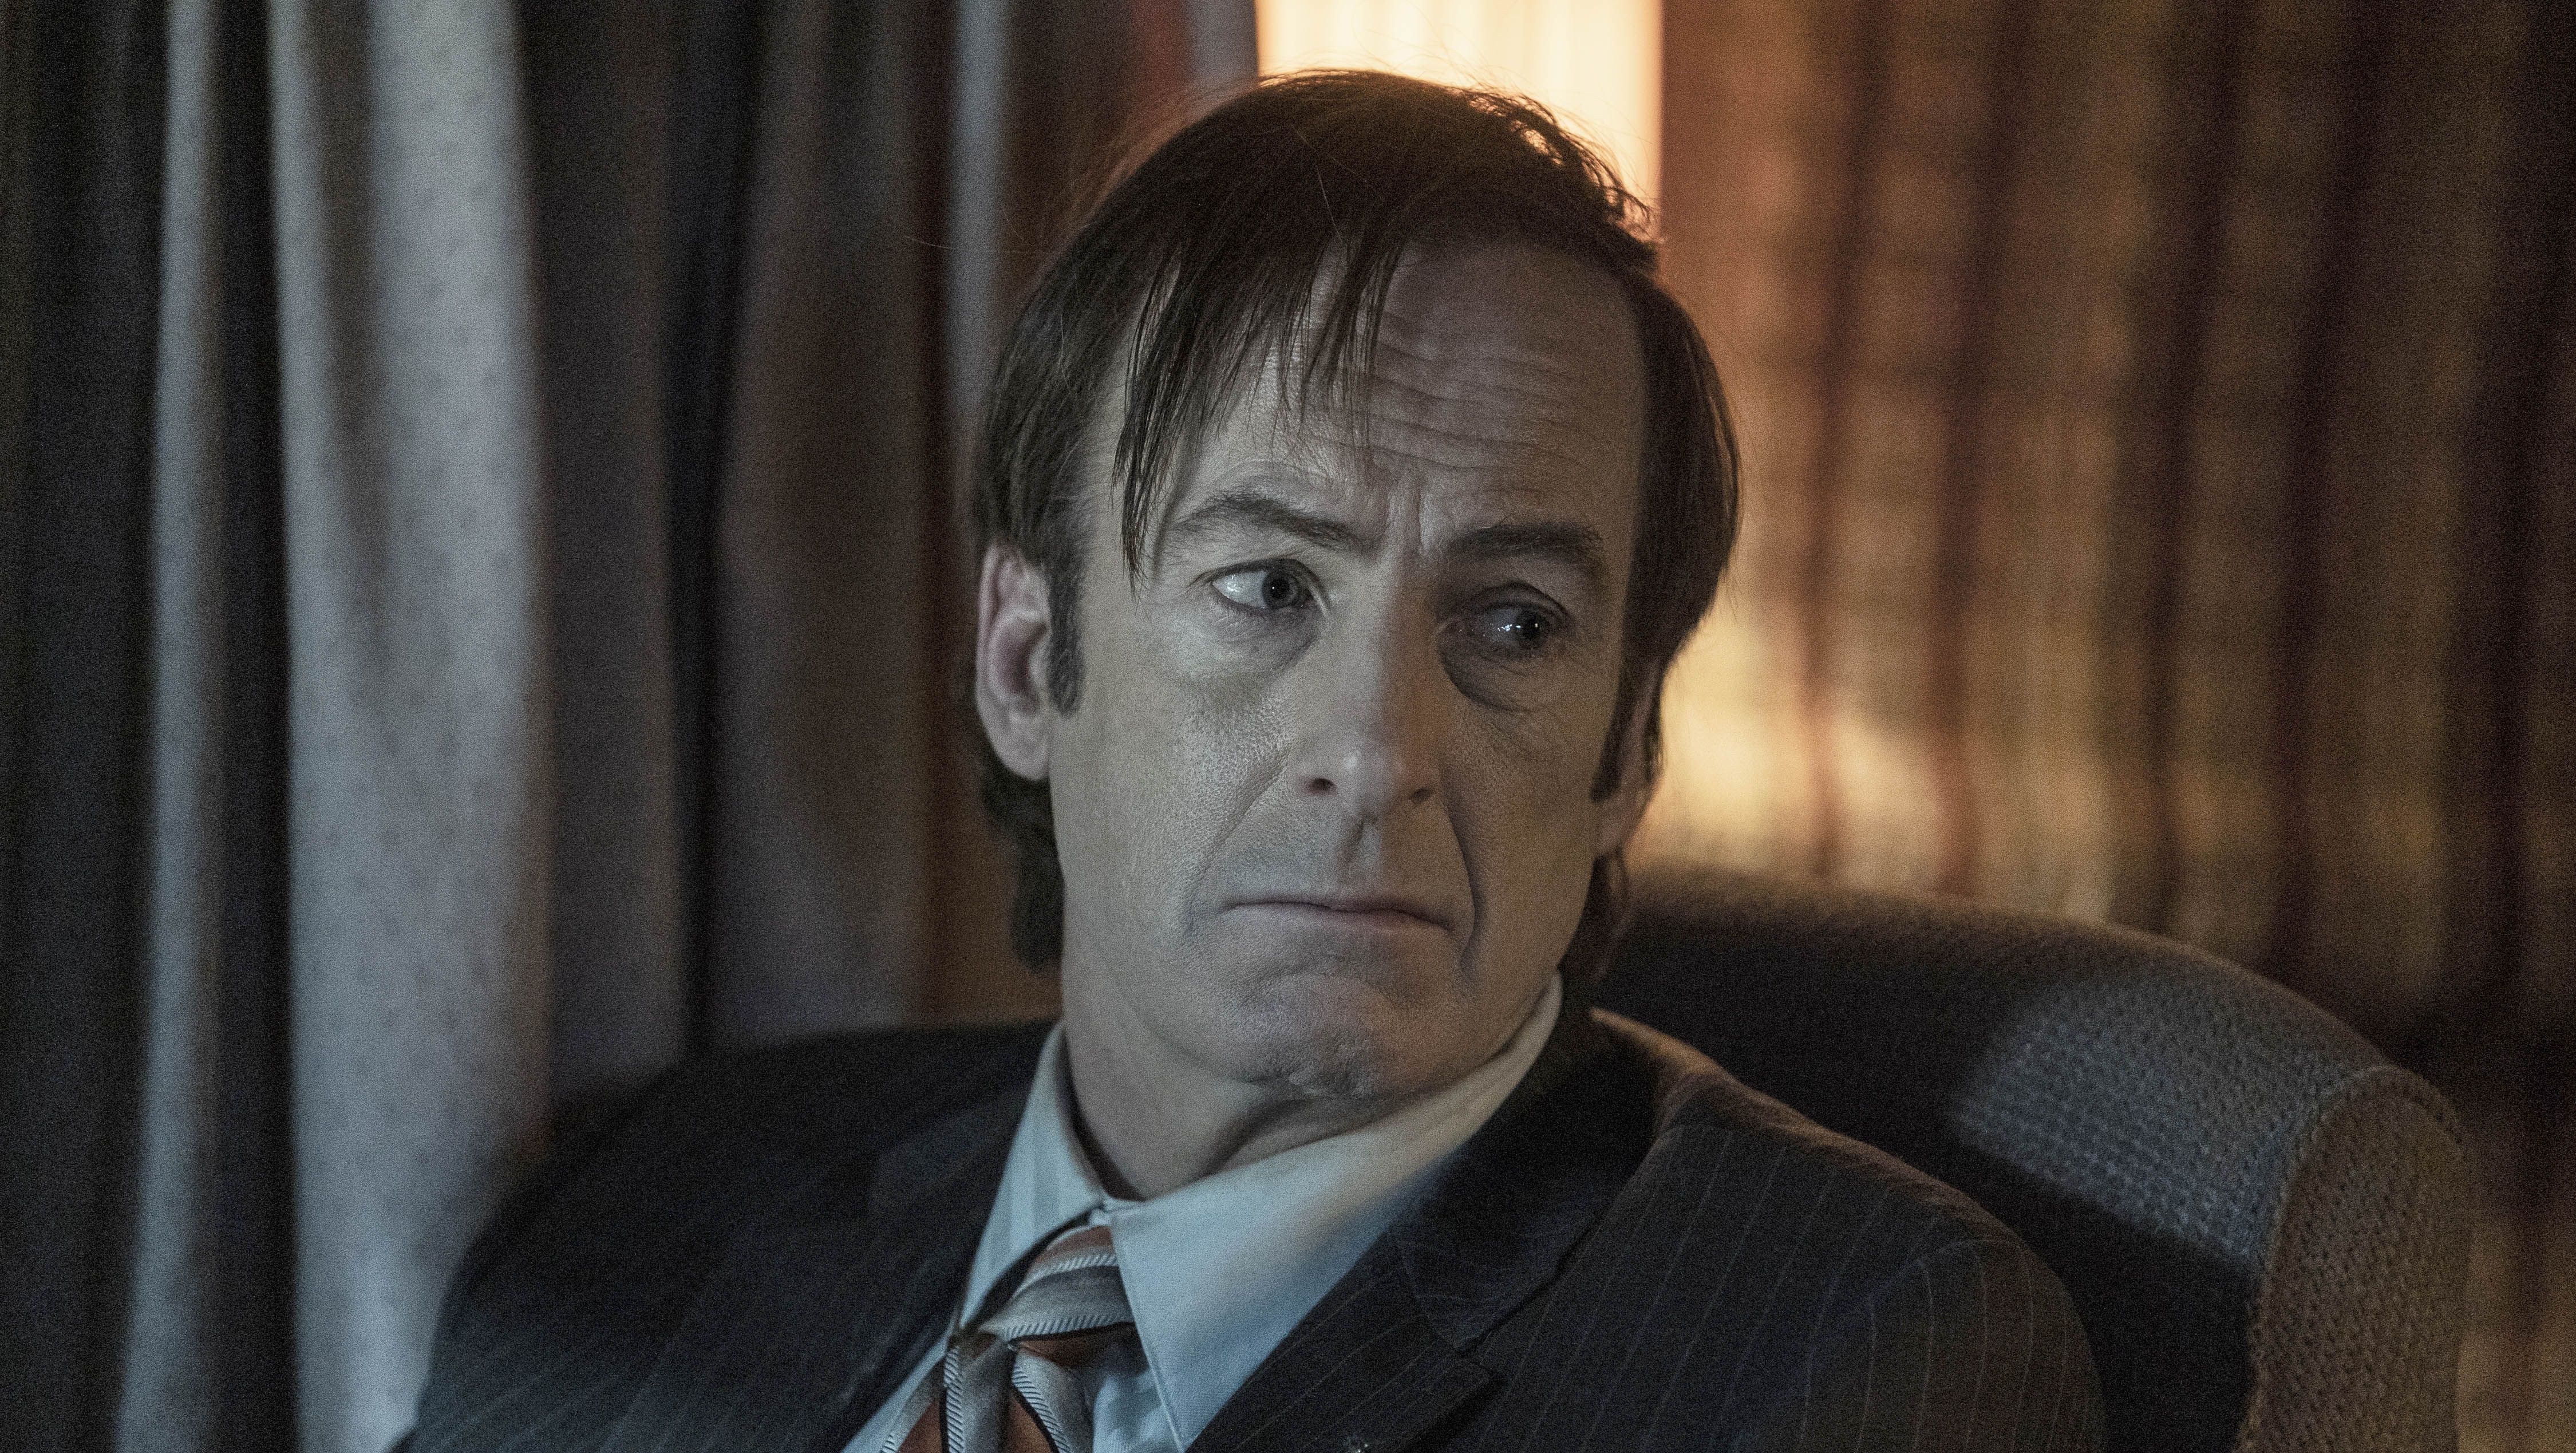 Better Call Saul ending explained – What happened in the finale?